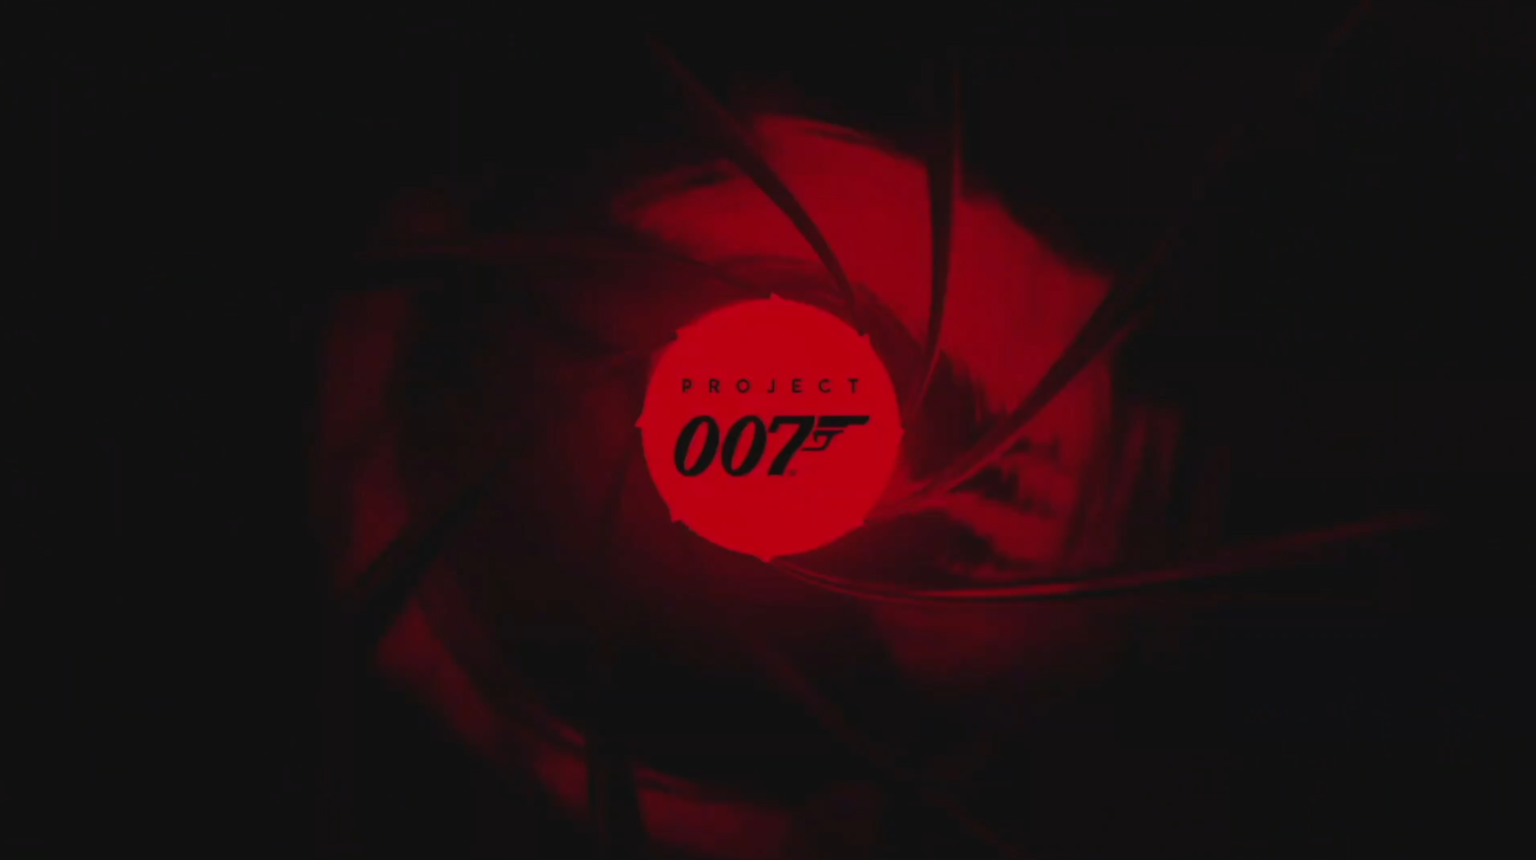 project 007 game release date